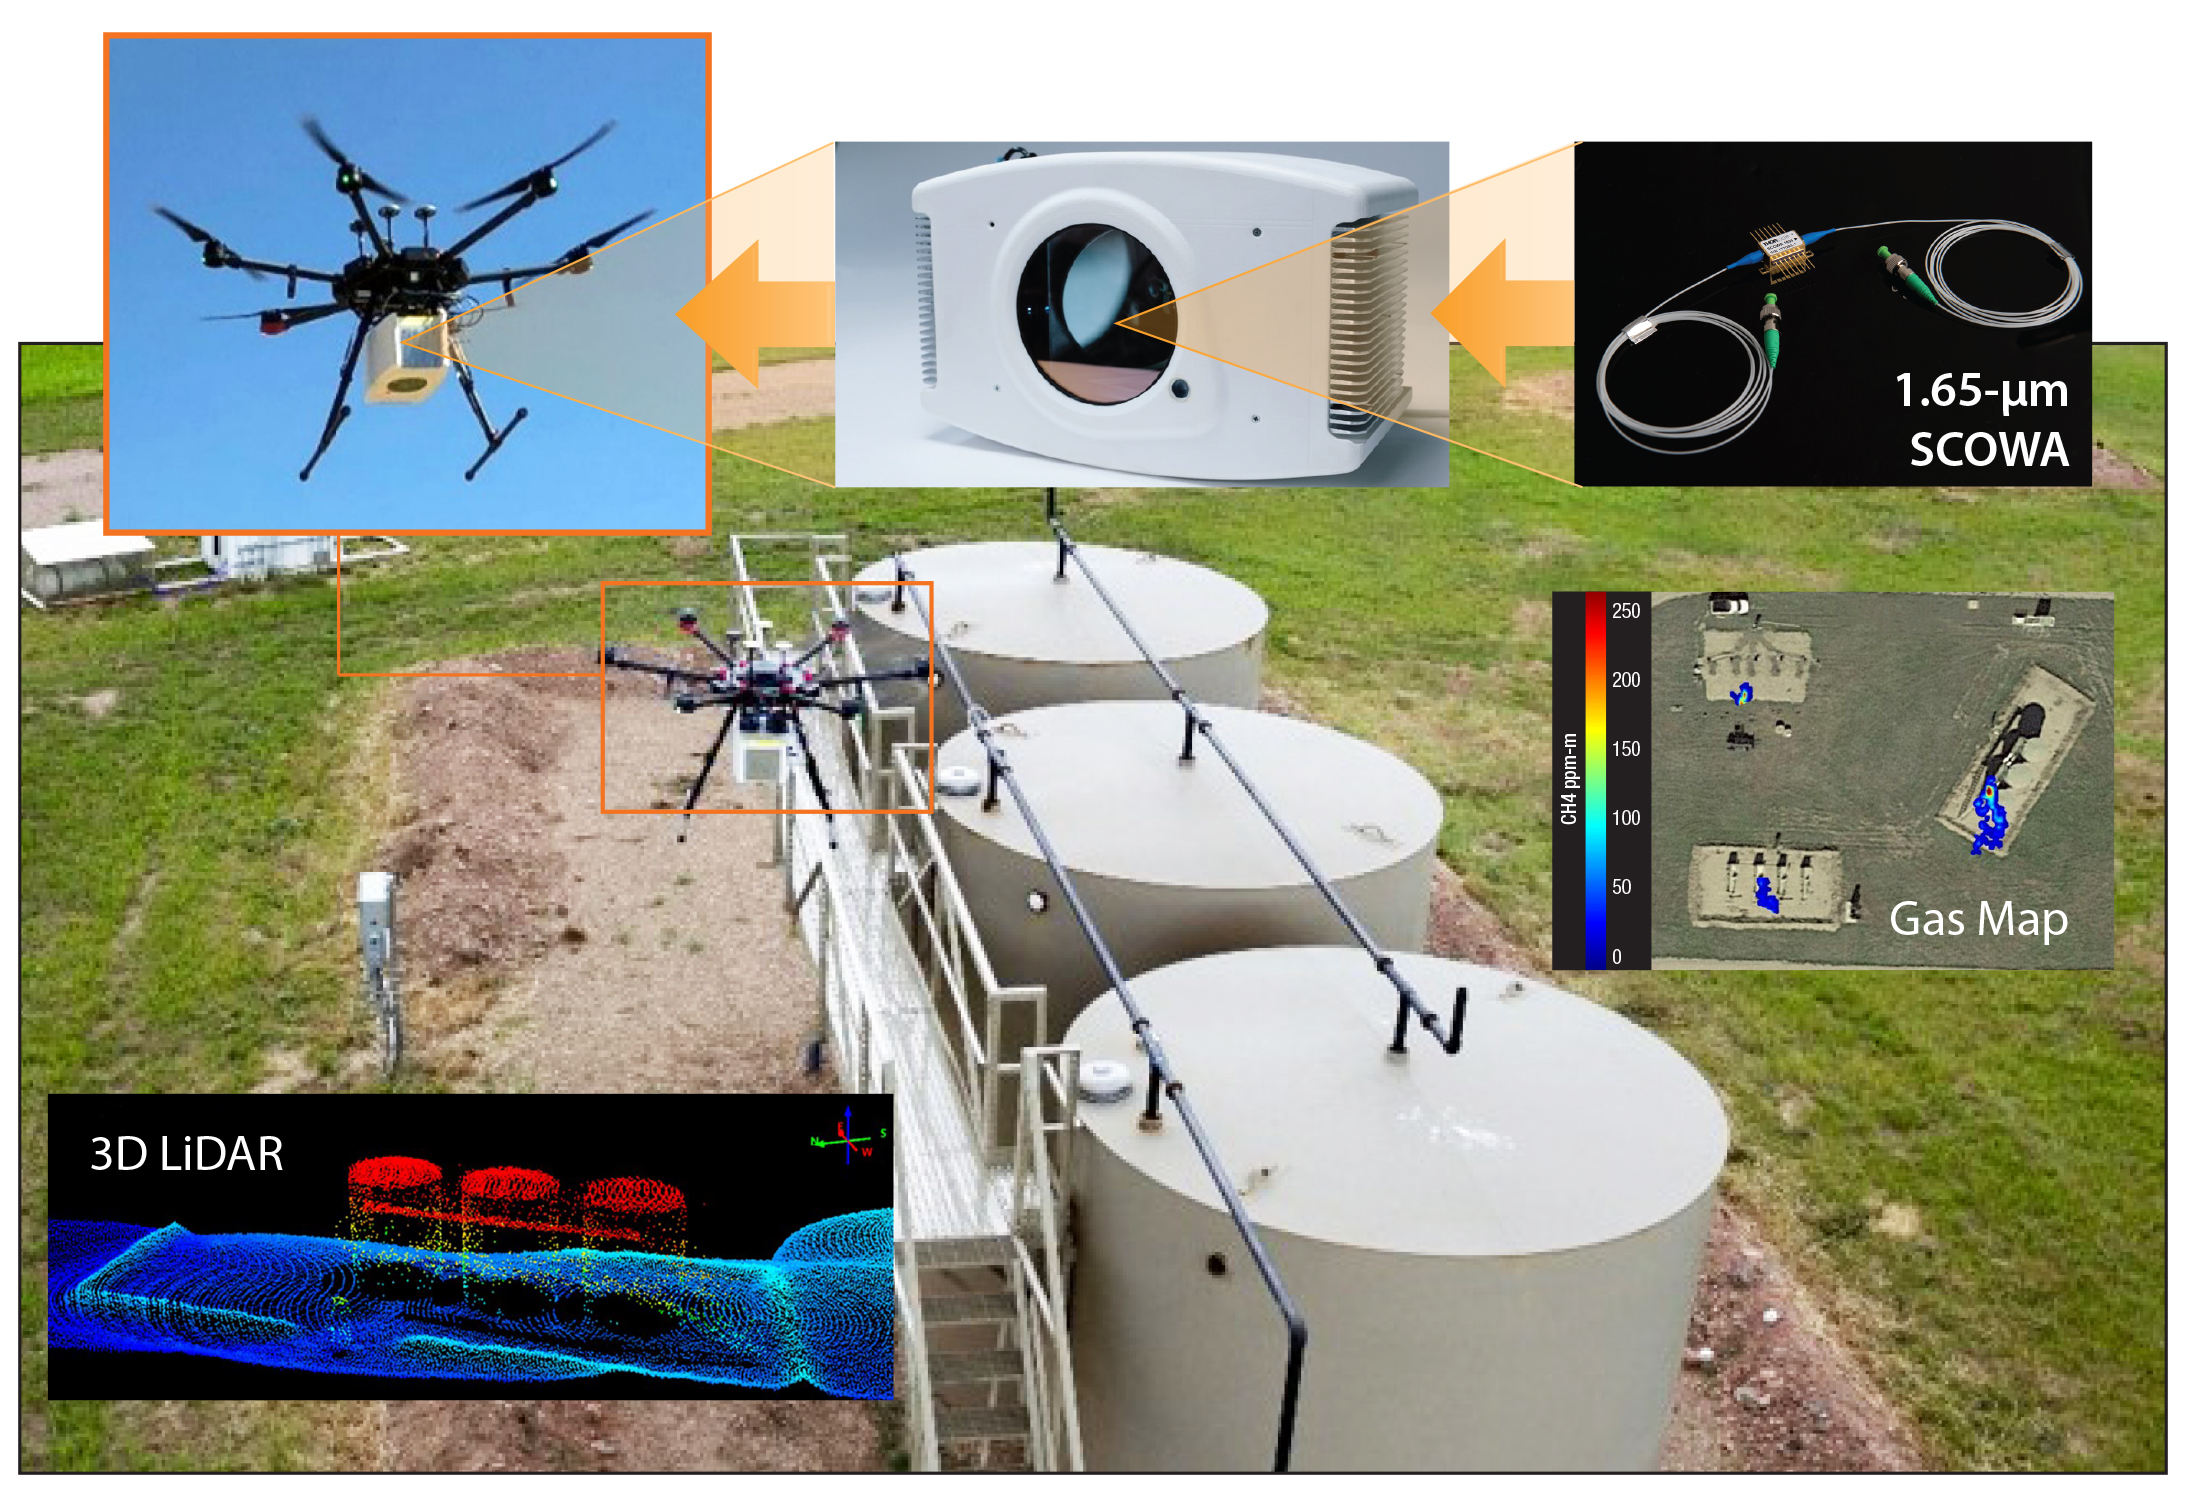 The drone-based Gas Mapping LiDAR™ system incorporates a 1.65-μm slab-coupled optical waveguide amplifier, top right. Also shown are a representative methane-gas map, lower right inset, and a 3D lidar image, lower left, collected by the system.